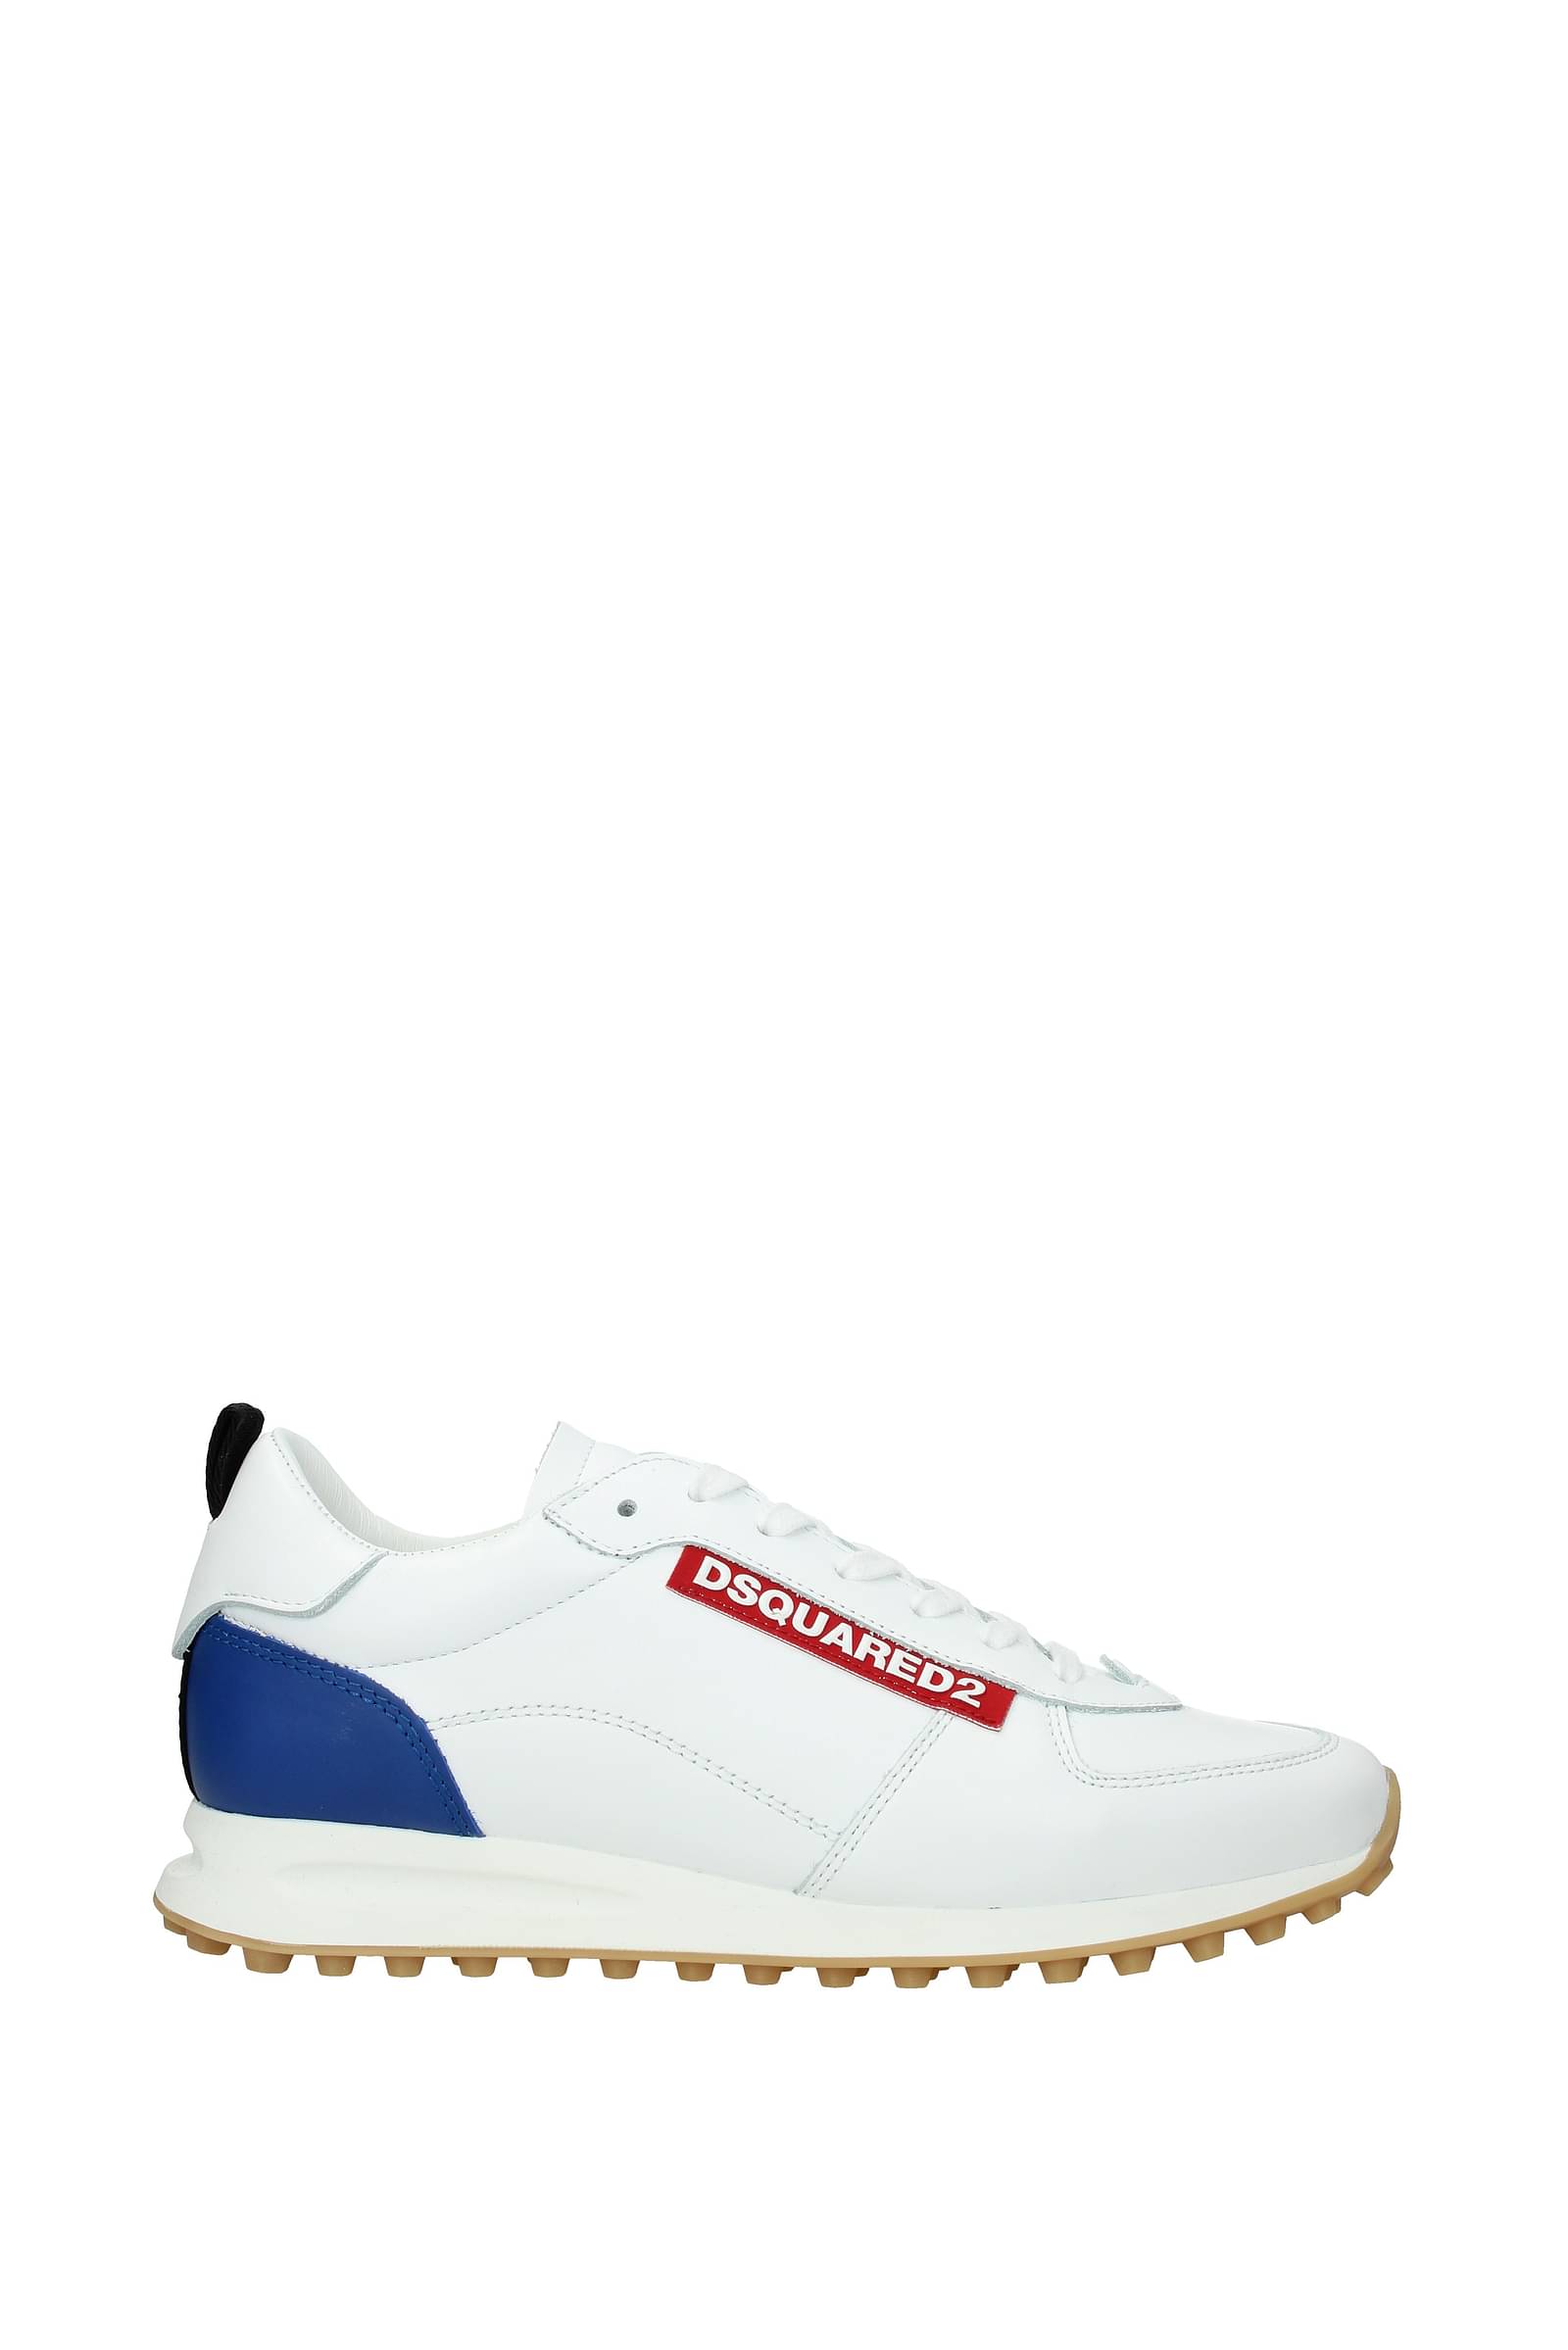 Discounted Dsquared2 sneakers: up to 50 